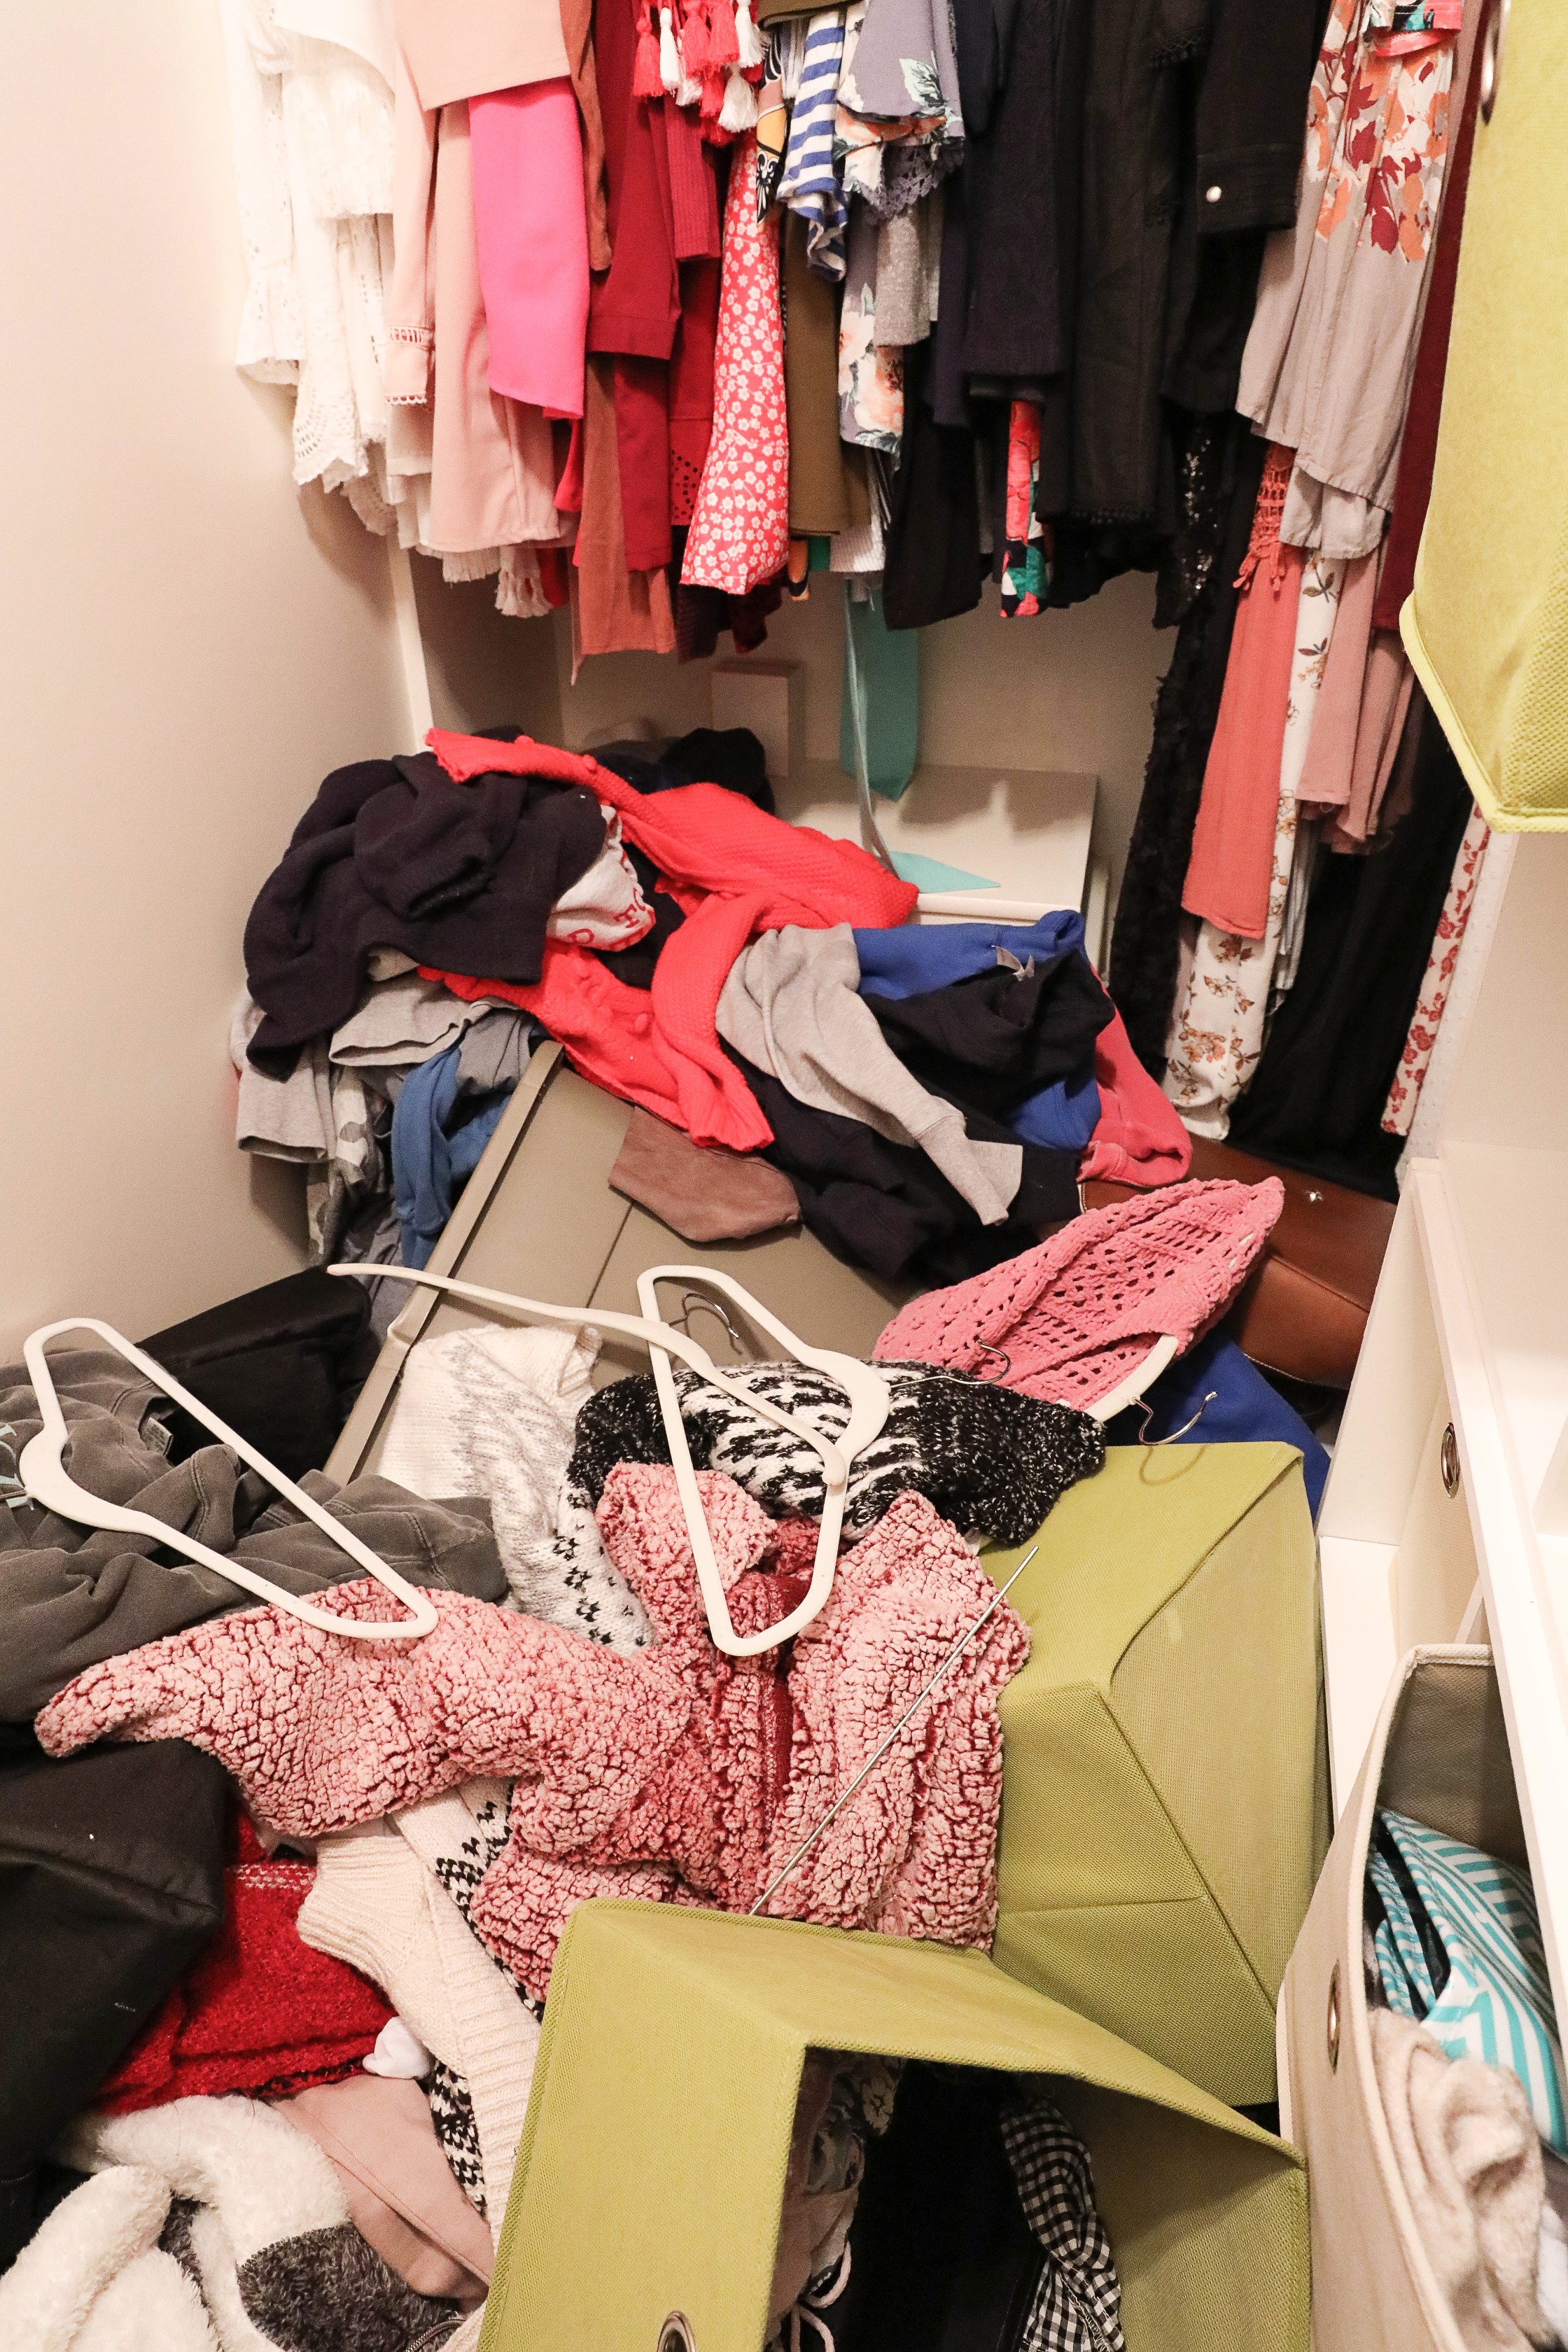 A new trend has tons of women cleaning out their closets until